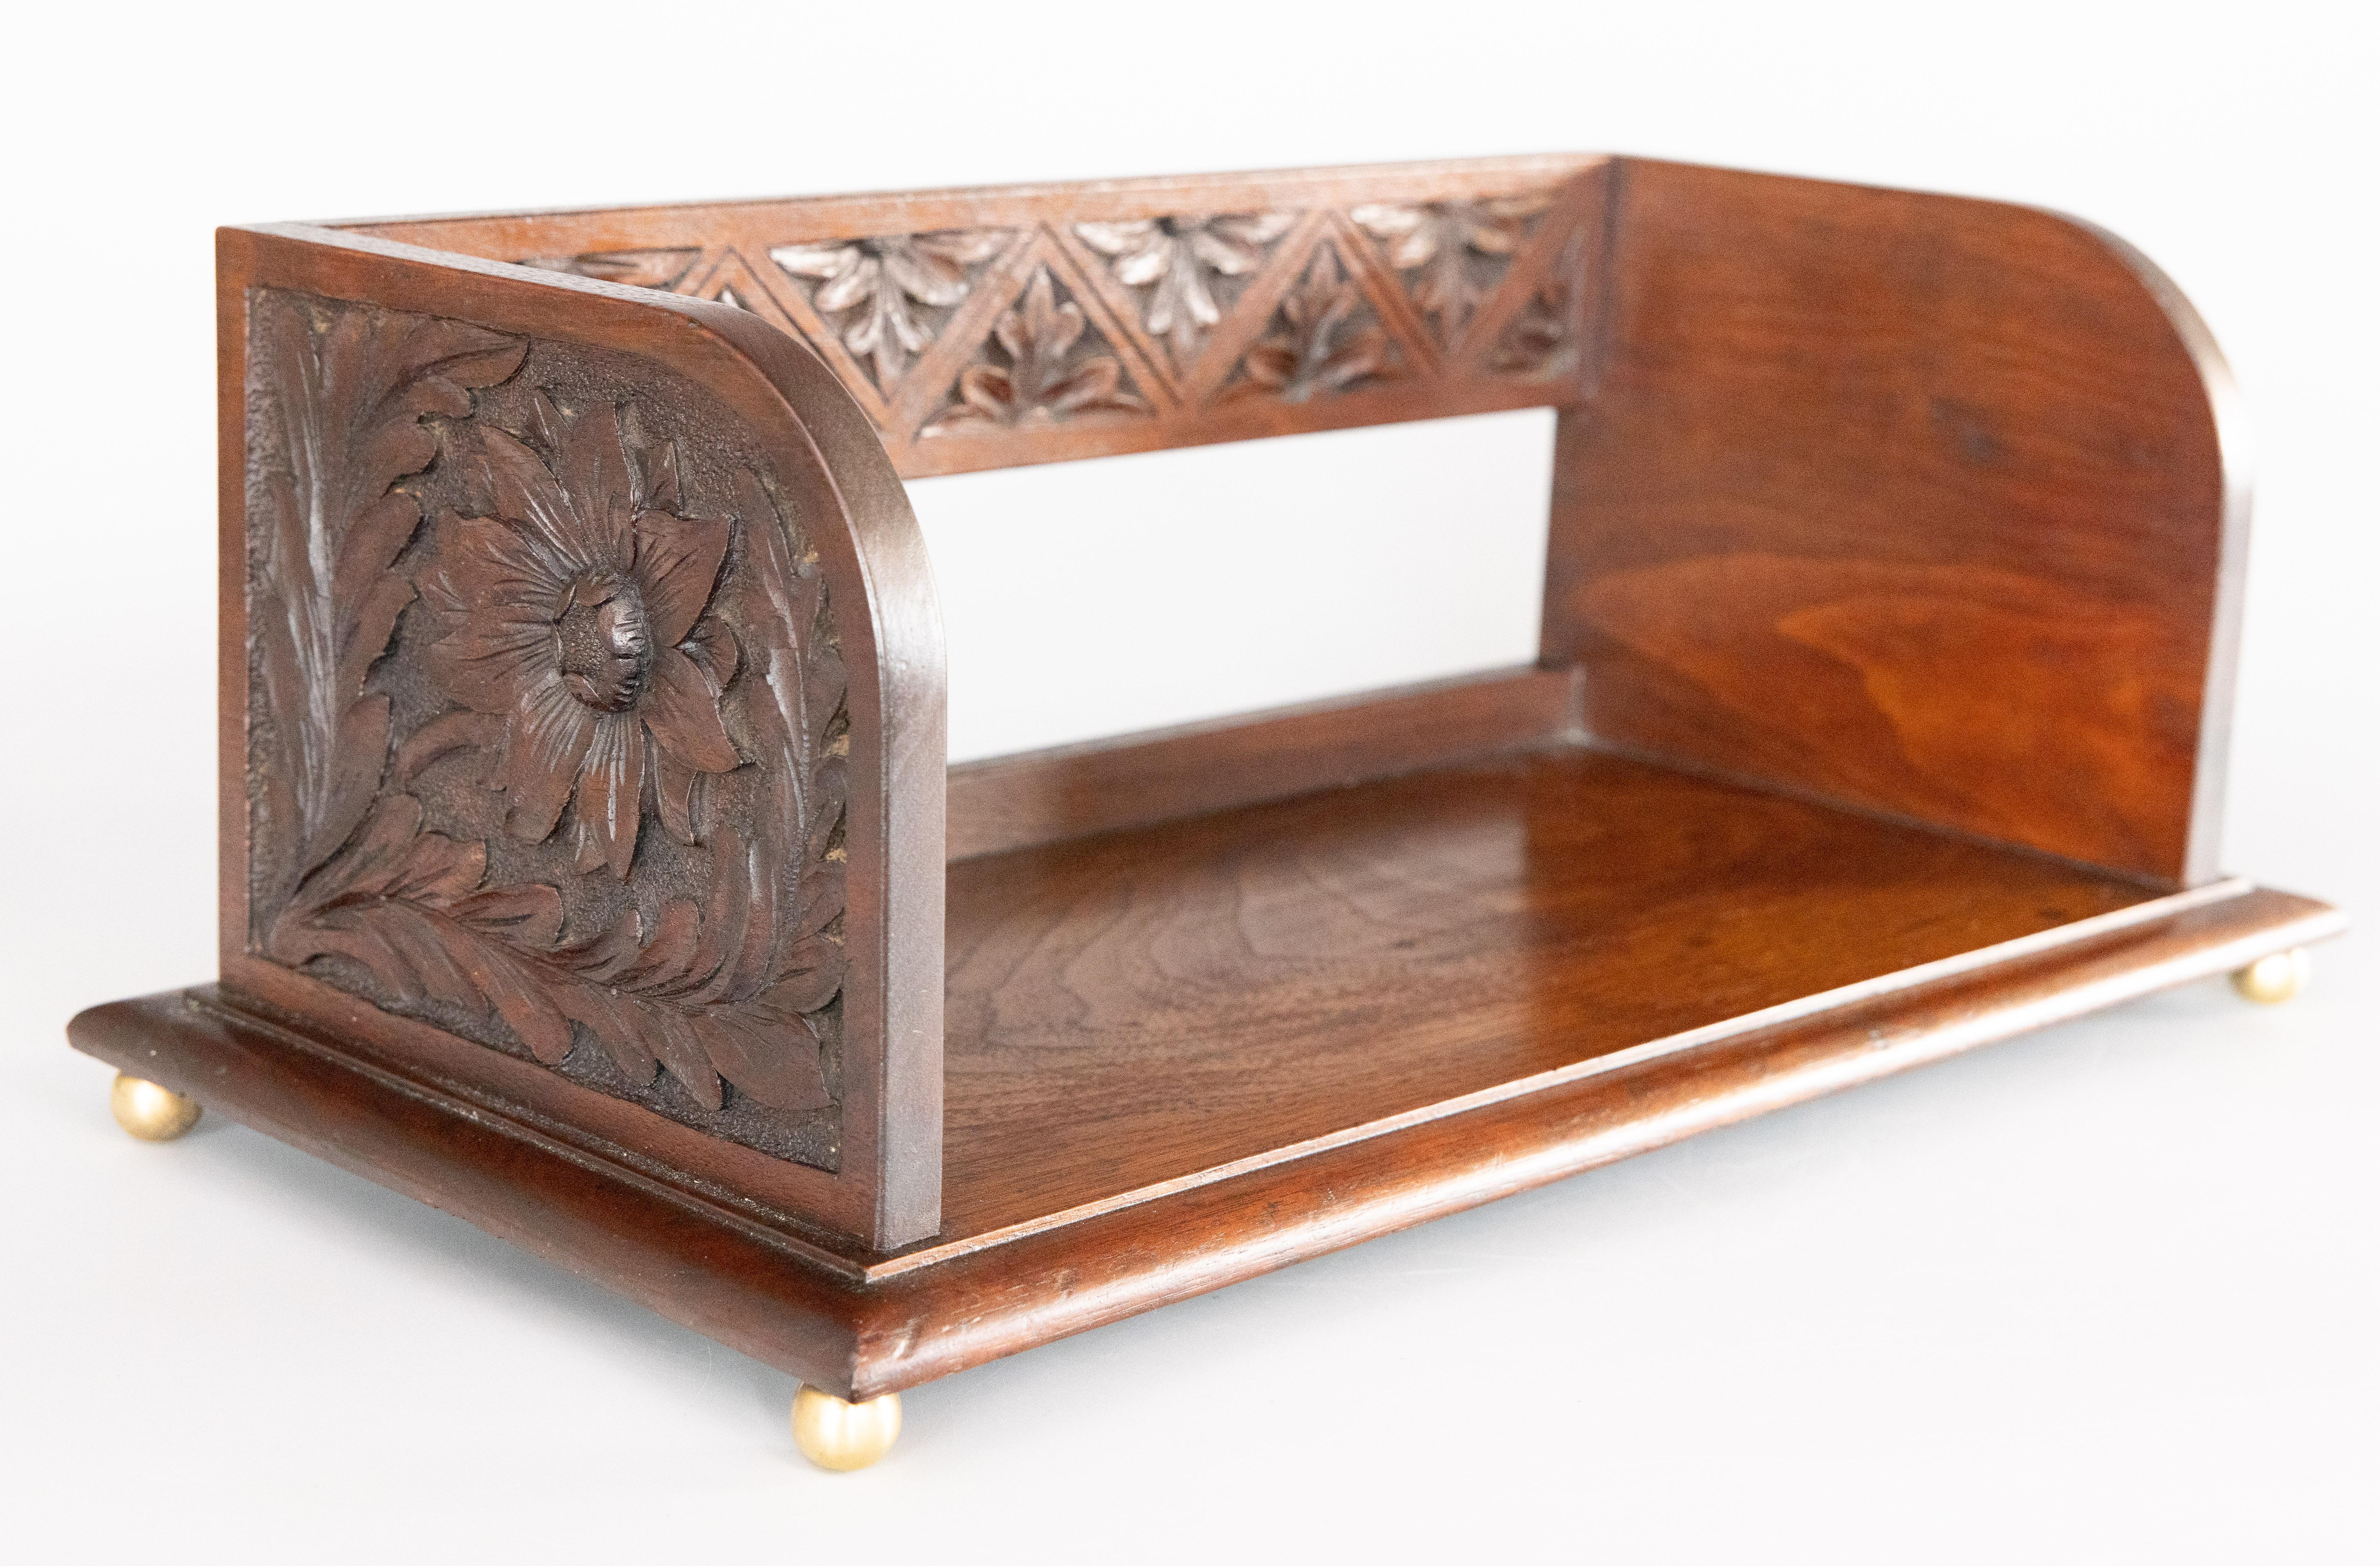 English Carved Mahogany Table Top Book Trough Rack Stand Bookends, C. 1900 For Sale 3